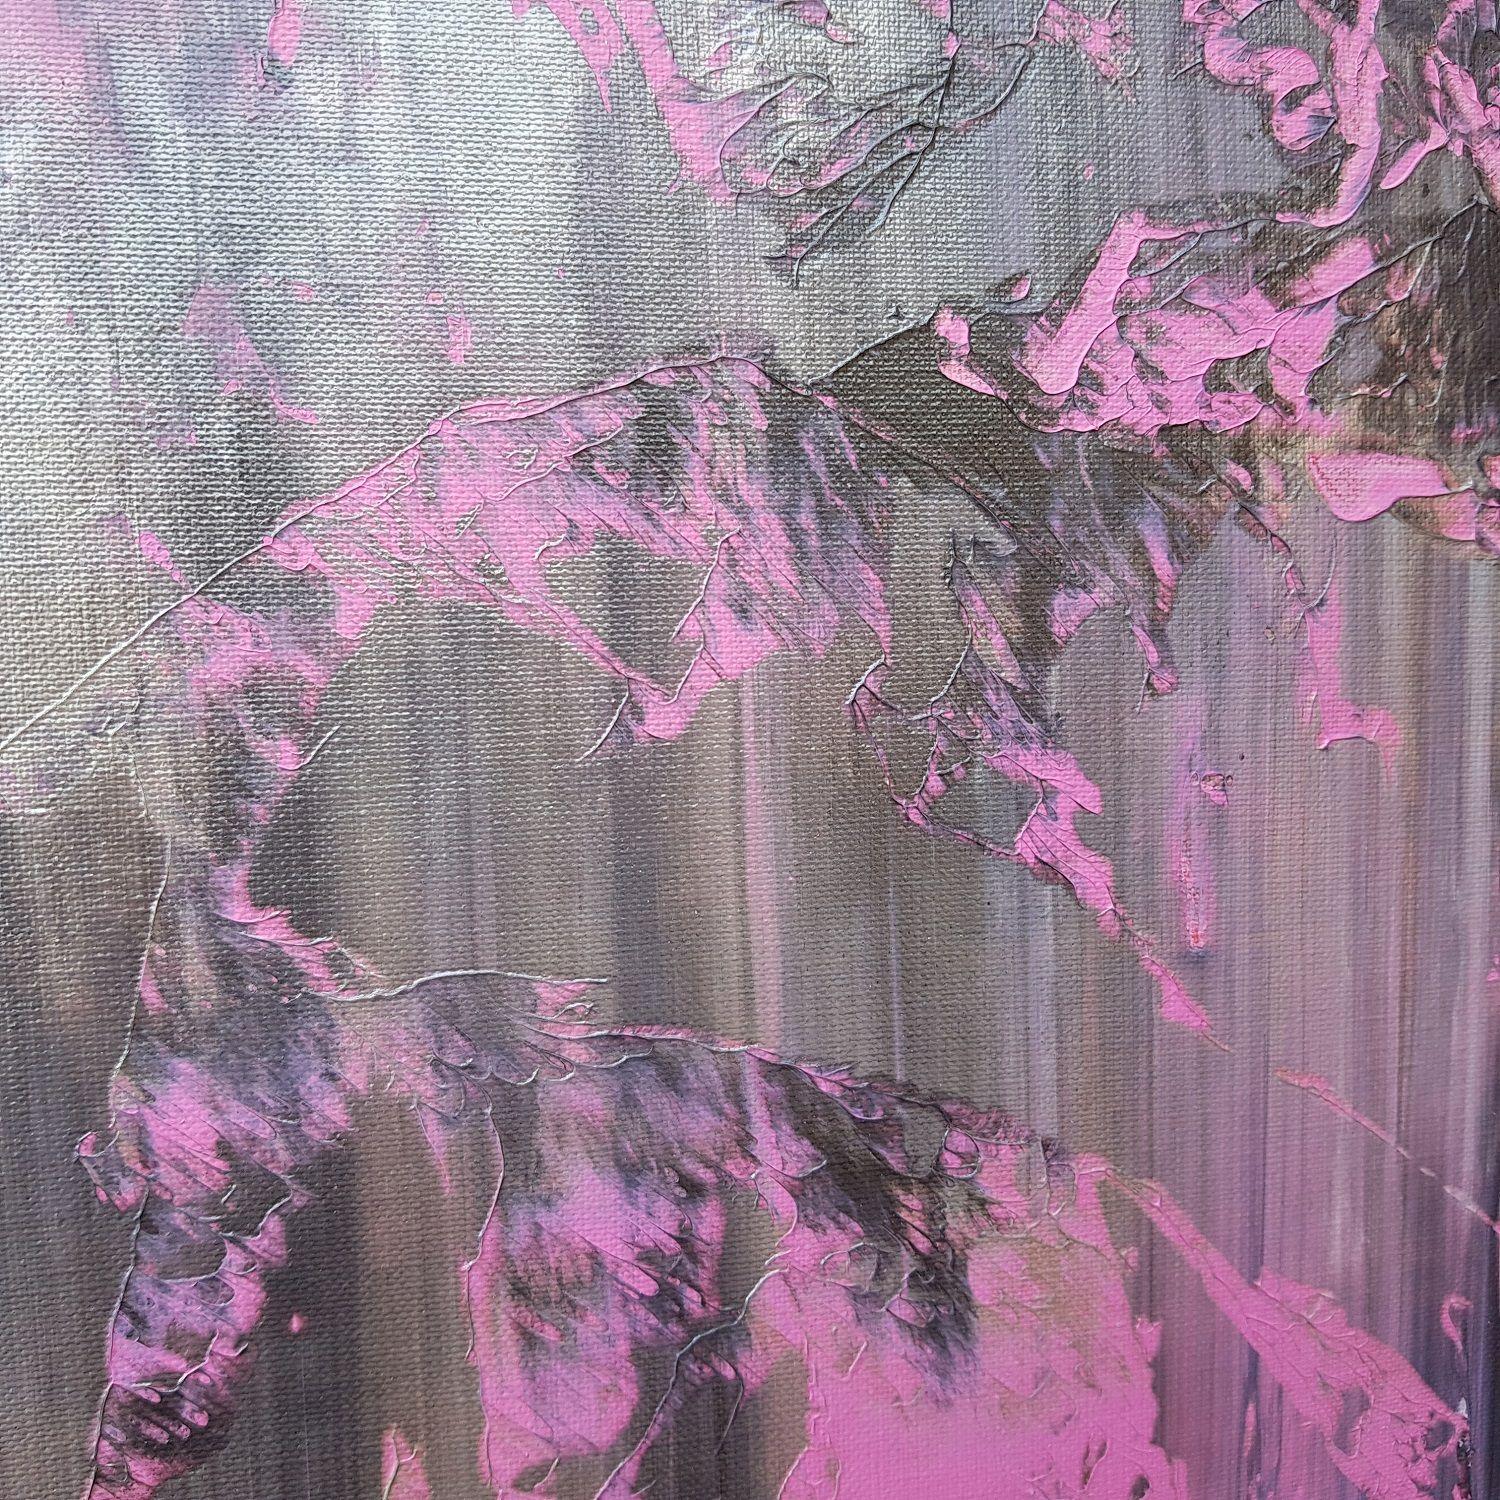 An original one-of-kind multilayer palette knife abstract painting with a gentle texture.    Shades of pink with silver and anthracite black color.  The metallic colors shine beautifully as the light changes during the day.  Full of details. 